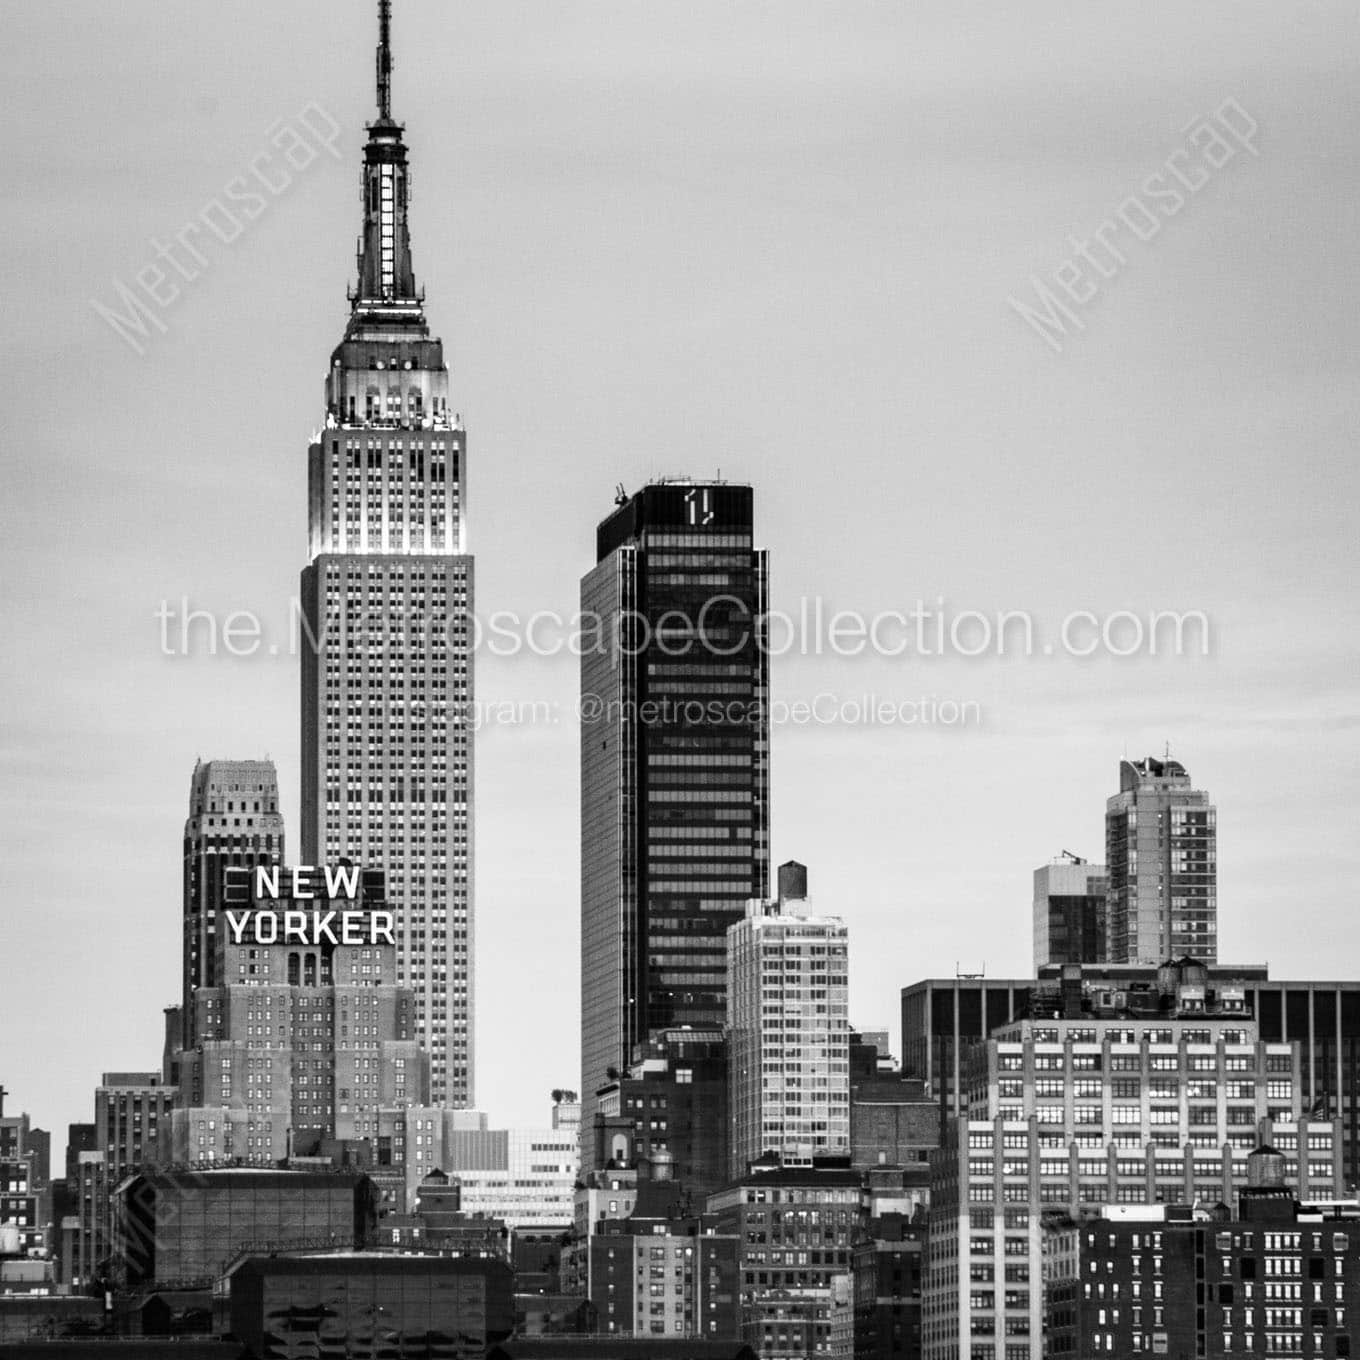 new yorker empire state building Black & White Wall Art